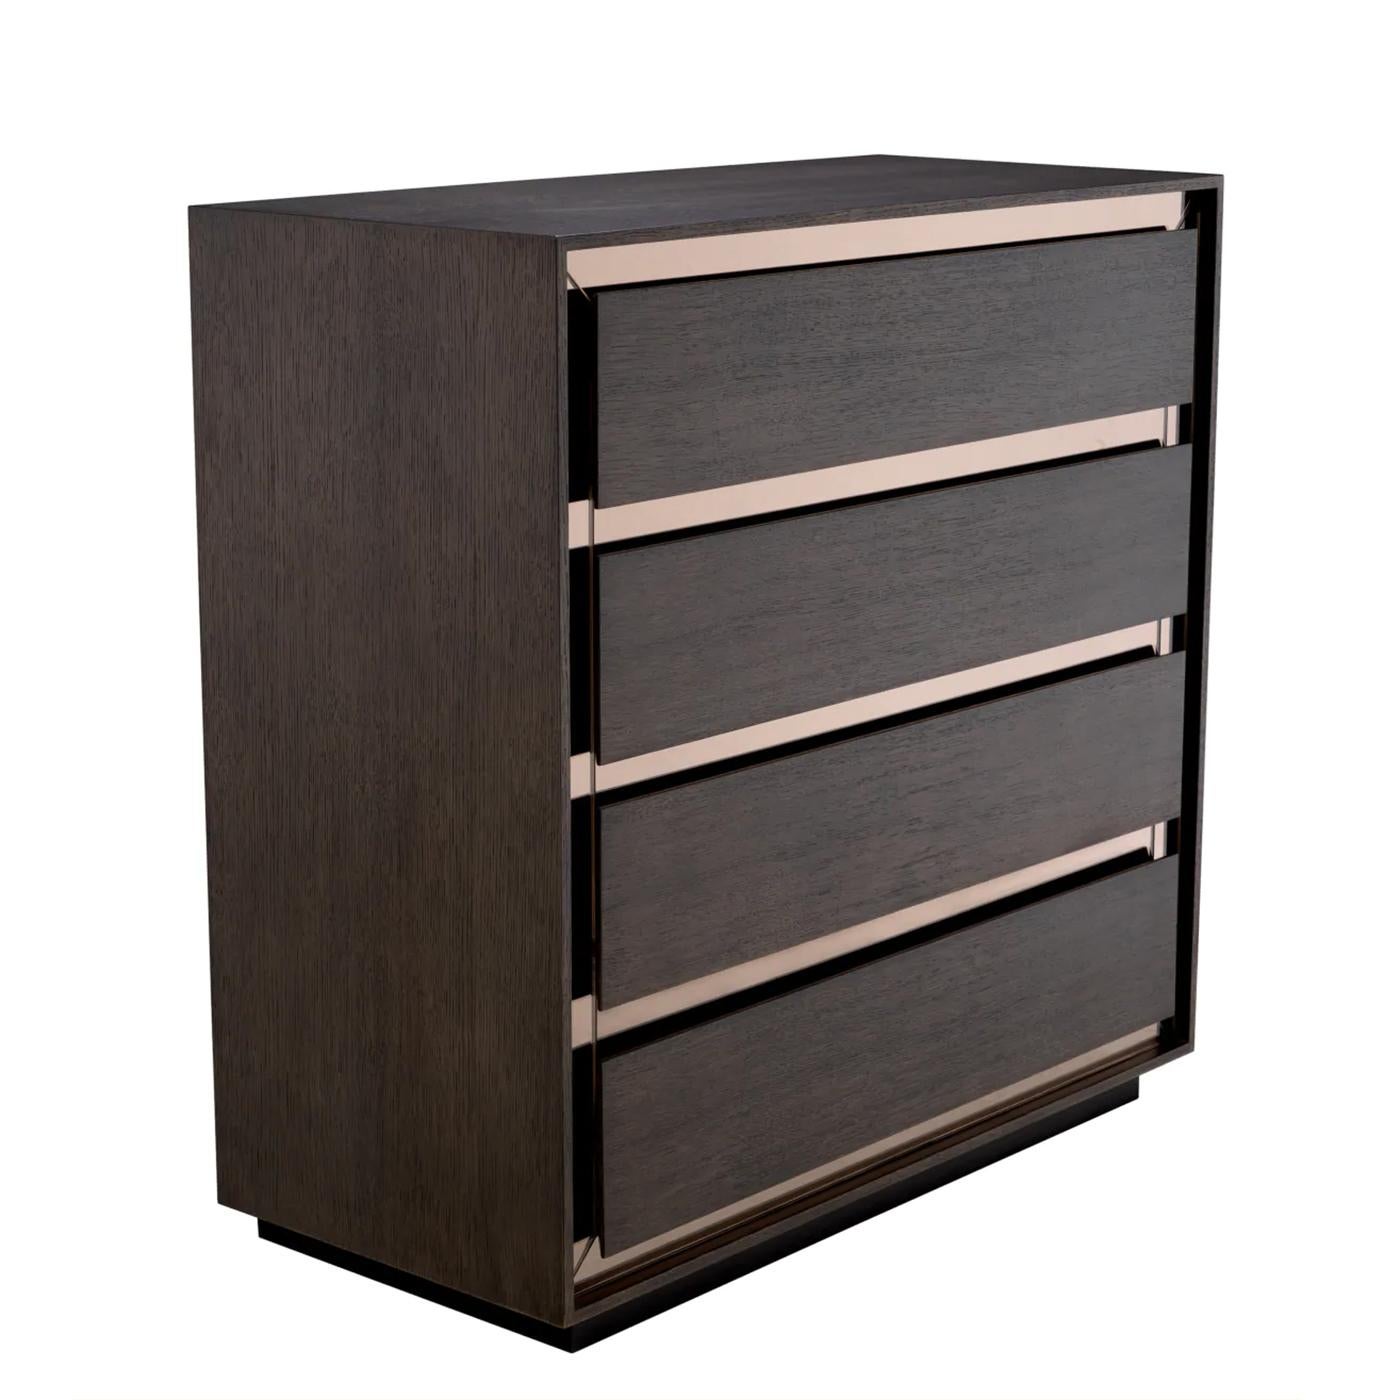 Chest of Drawers Eliom with wooden structure in 
smocked oak veneer, with mirror glass in bronzed finish.
With 4 drawers with easy glide system.